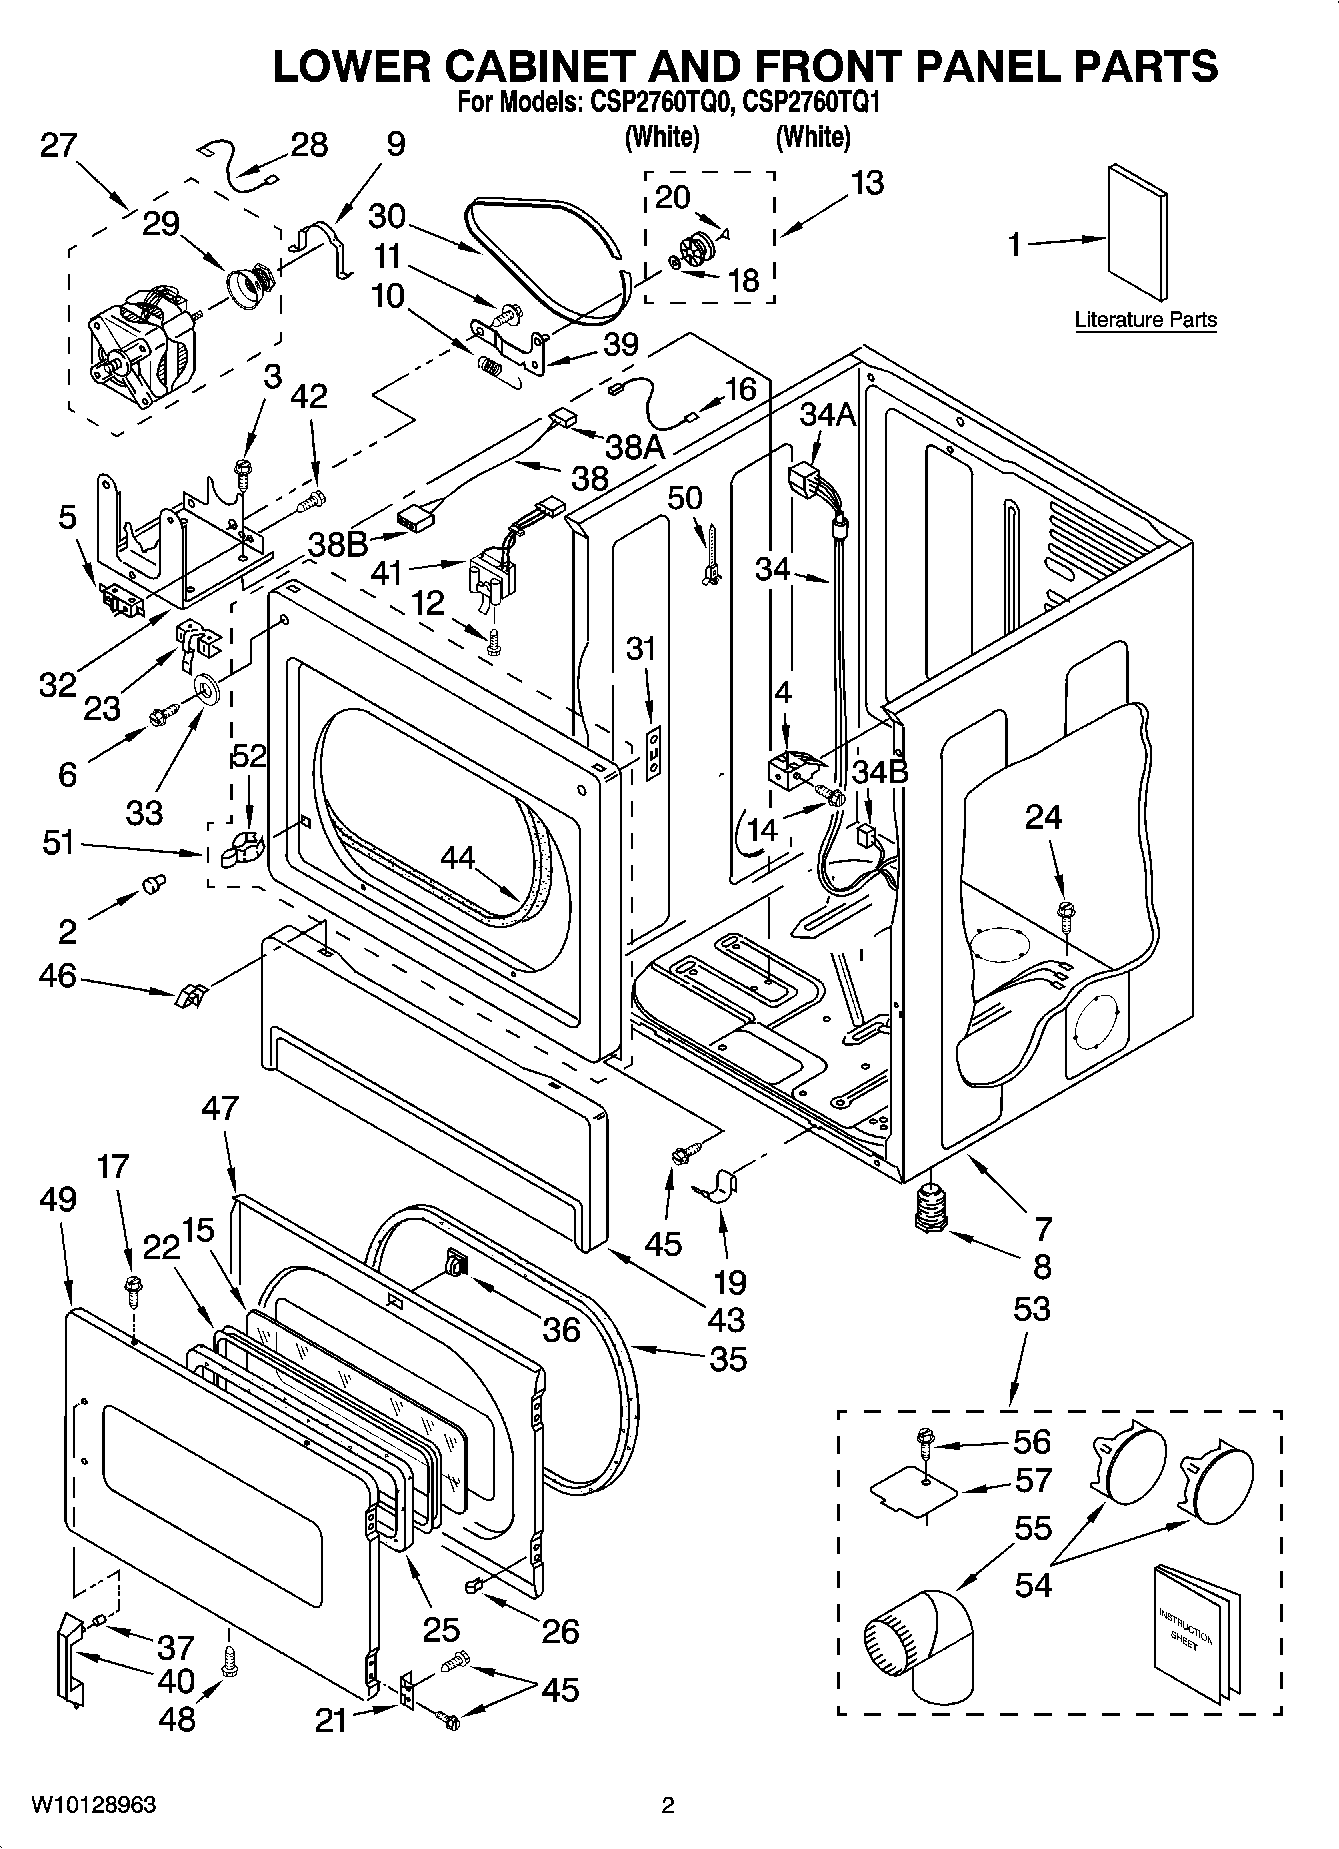 01 - LOWER CABINET AND FRONT PANEL PARTS